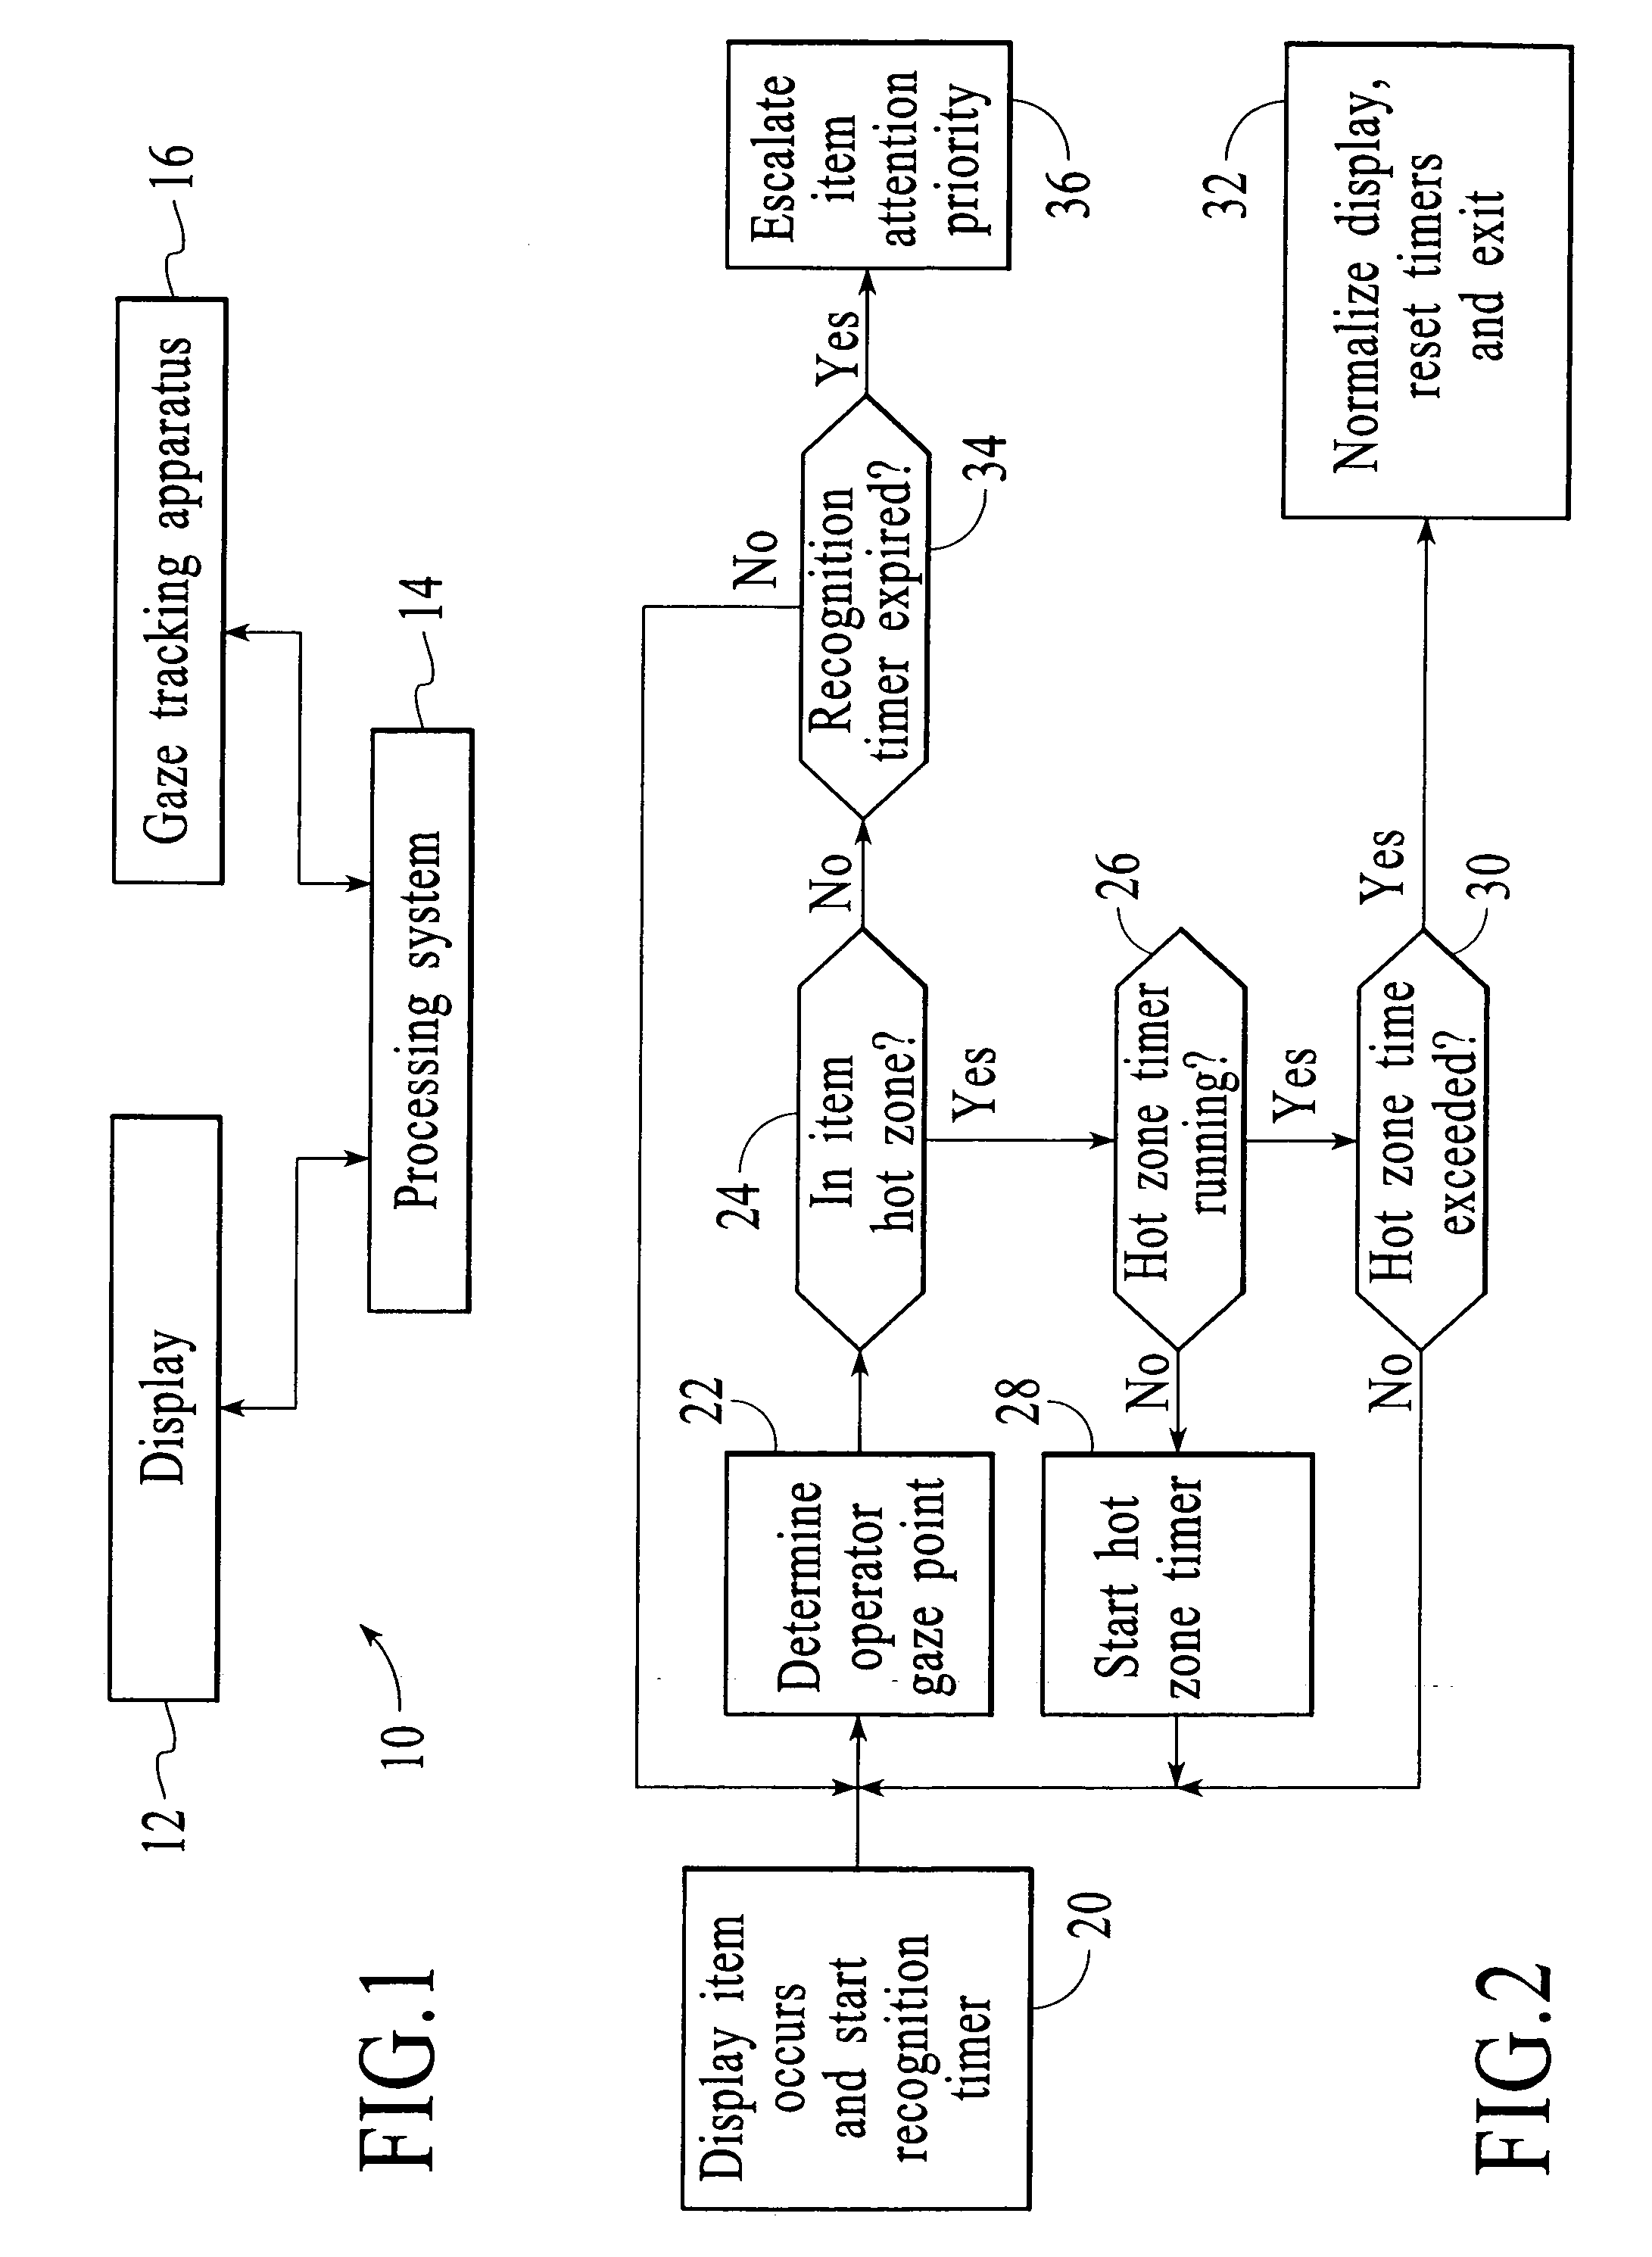 Method and system for automated monitoring of a display